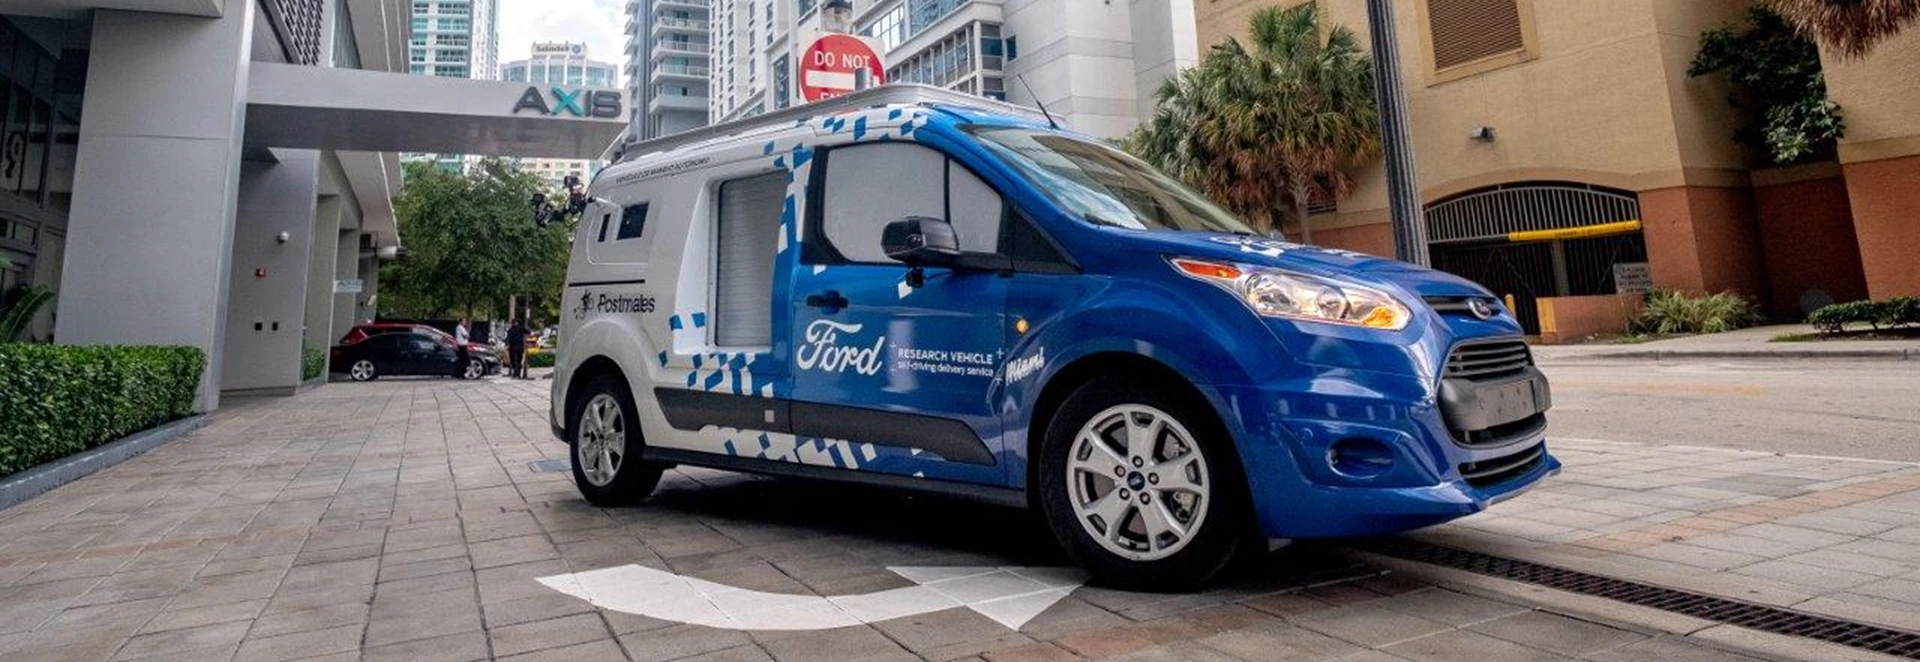 Ford and Postmates team up for self-driving food delivery service